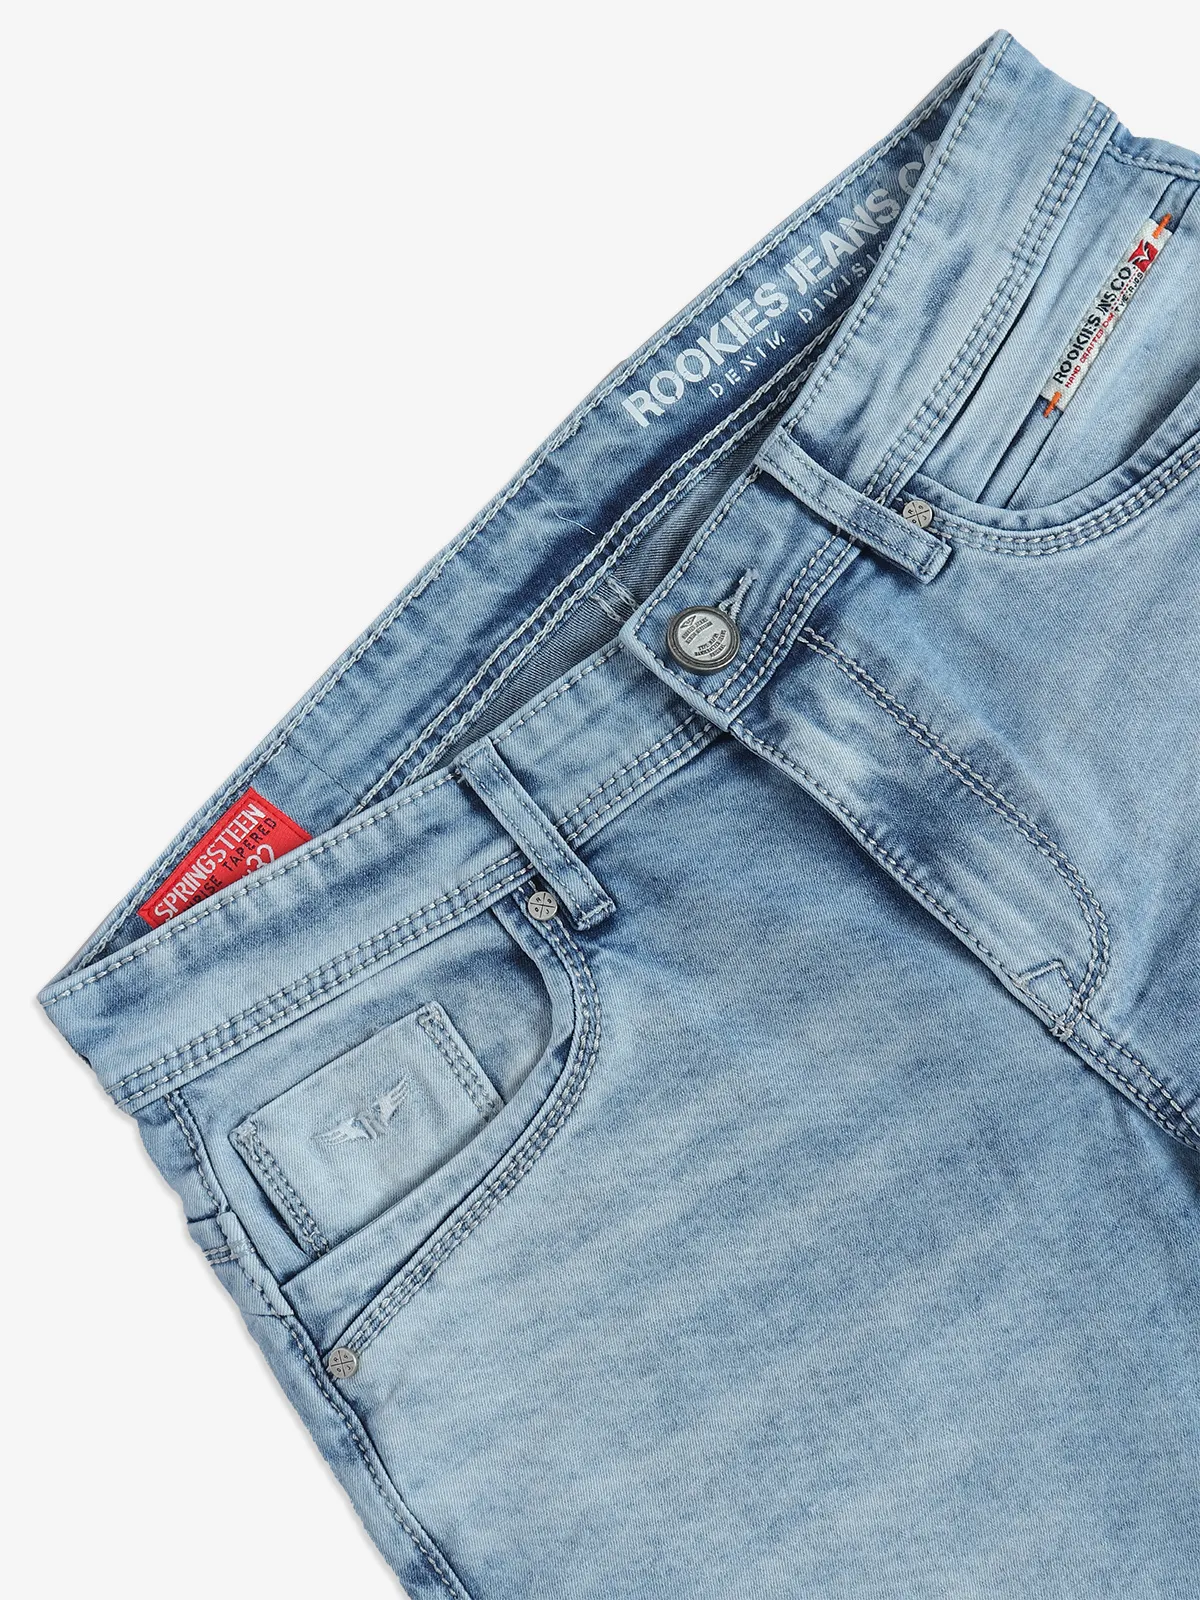 ROOKIES ice blue washed springsteen fit jeans